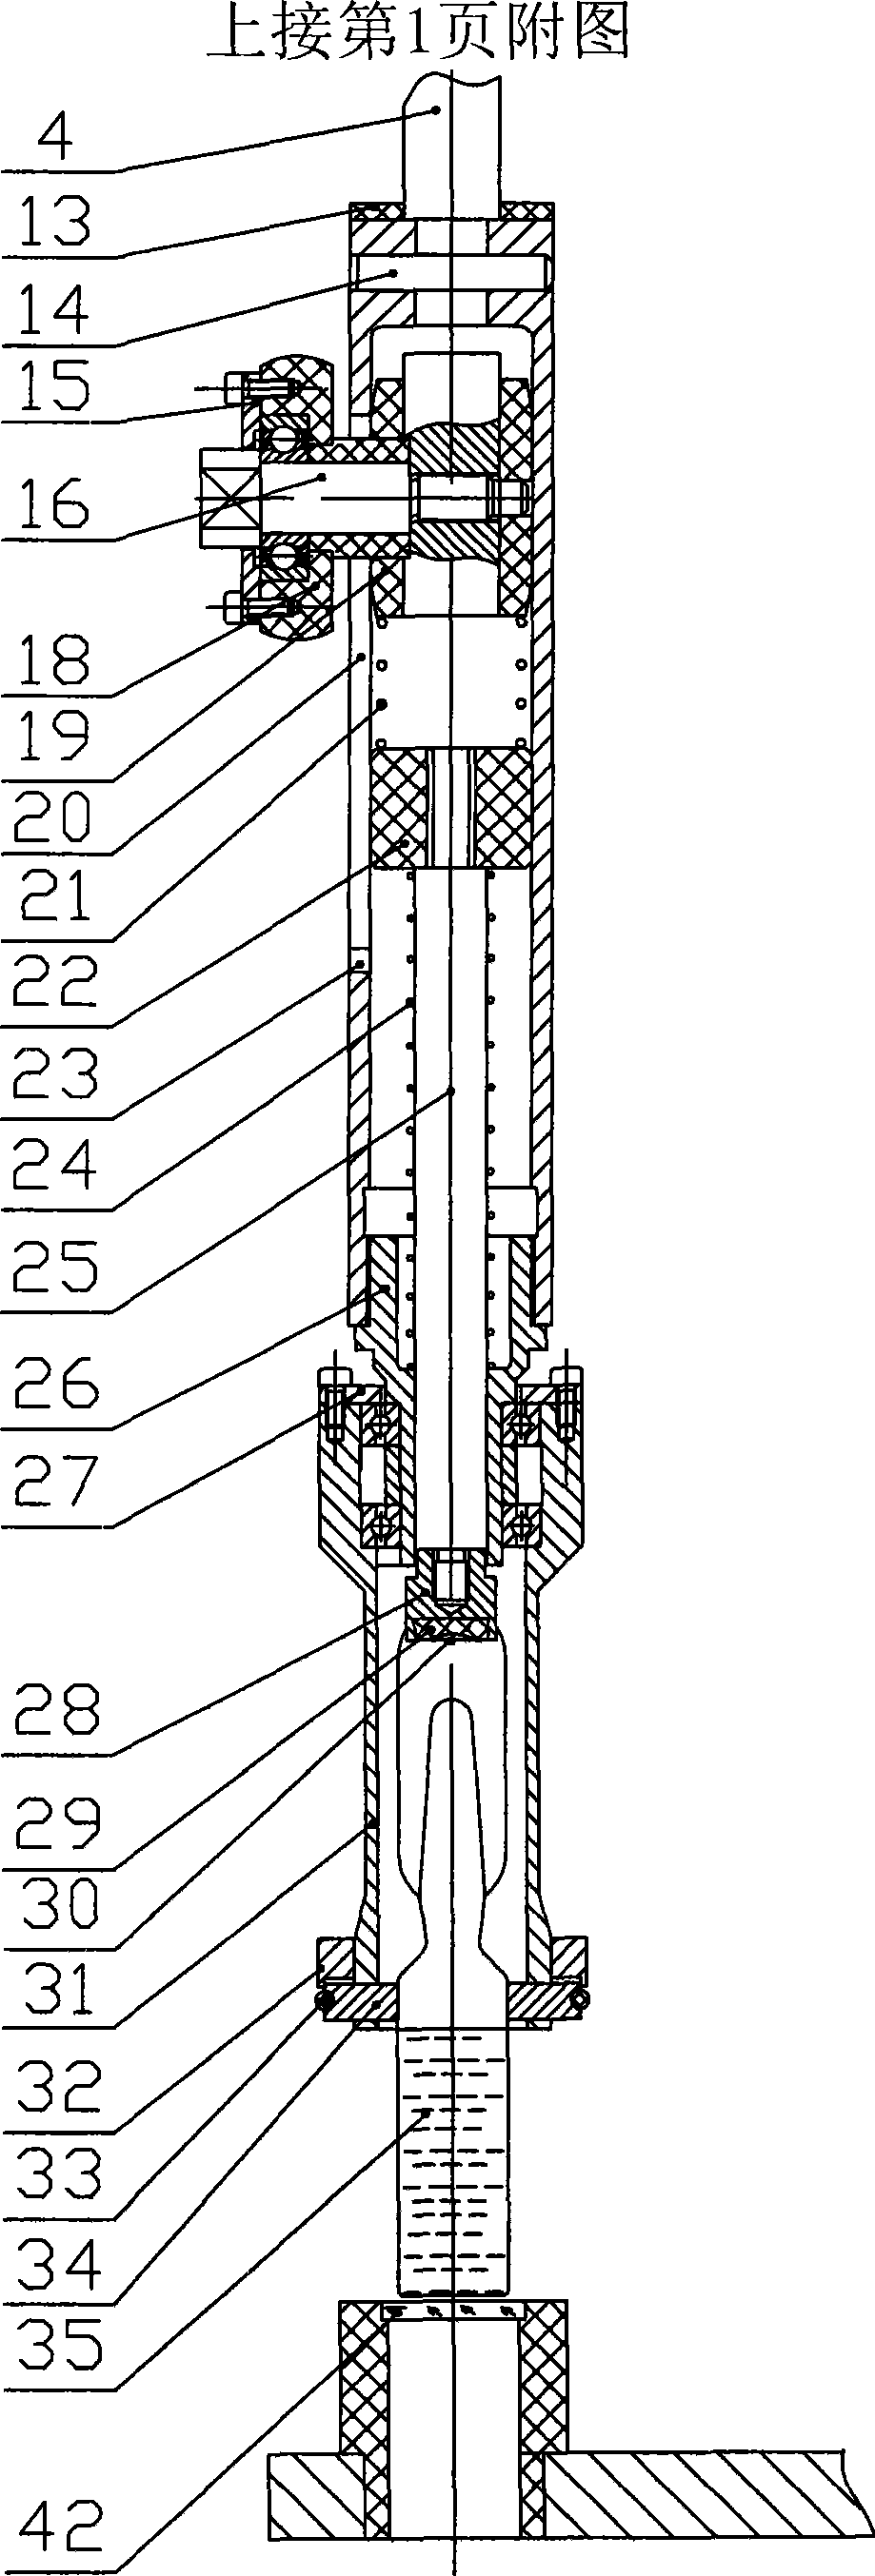 Ampoule clamping device of impurity detection device for bottle-contained liquid